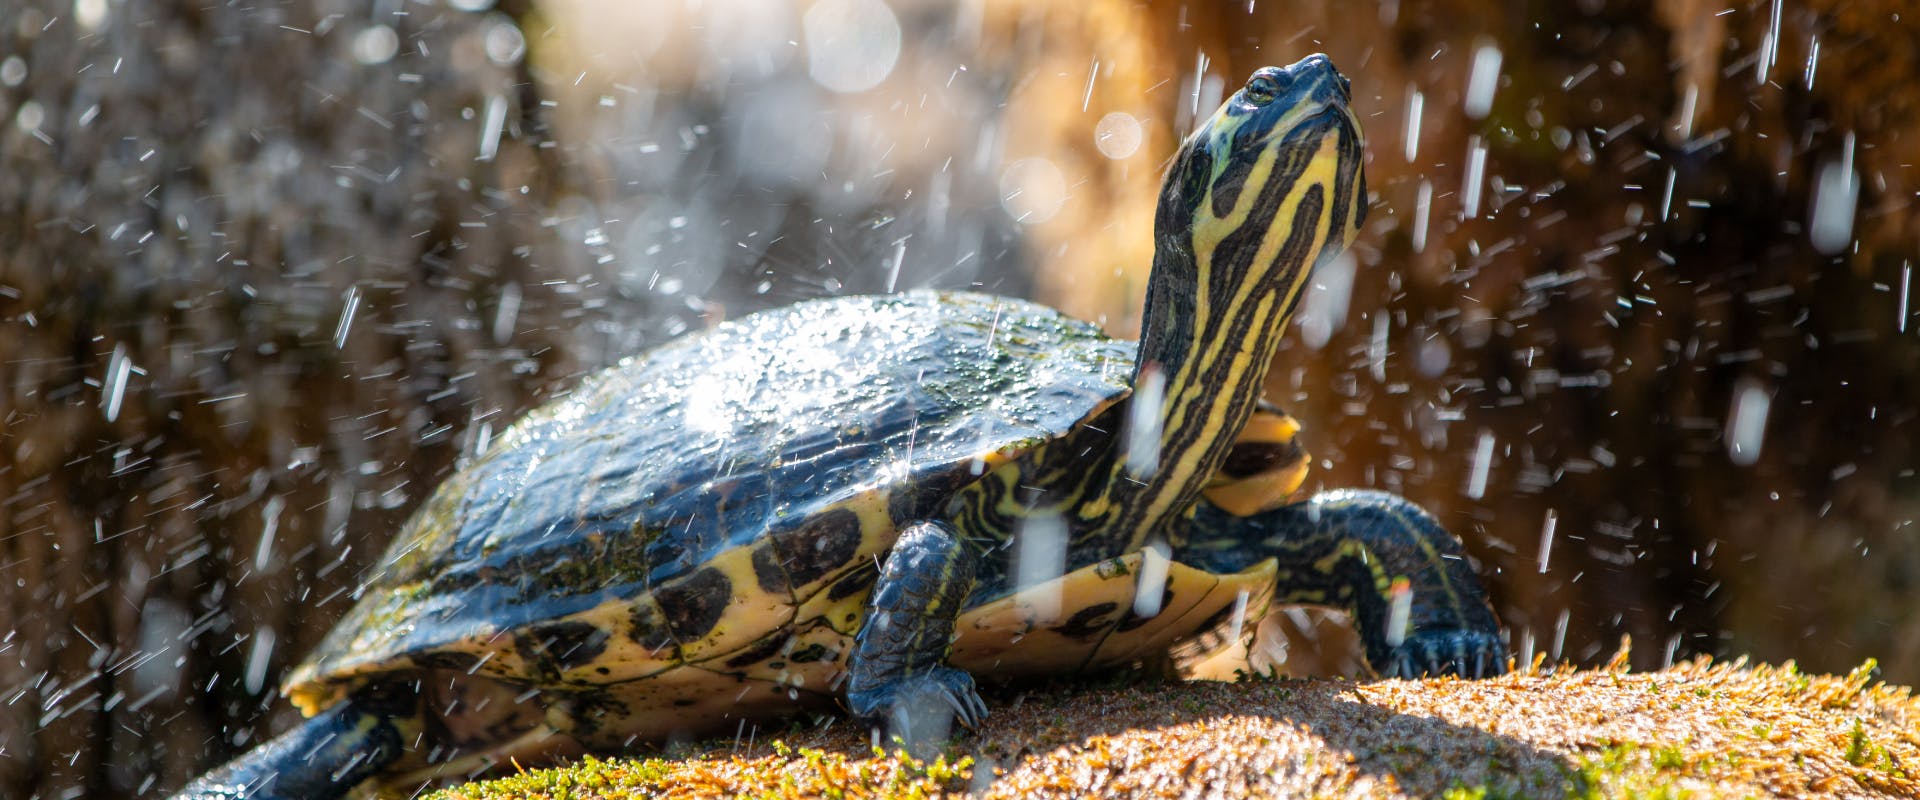 an amphibious pet terrapin resting on a rock whilst water is splash onto it